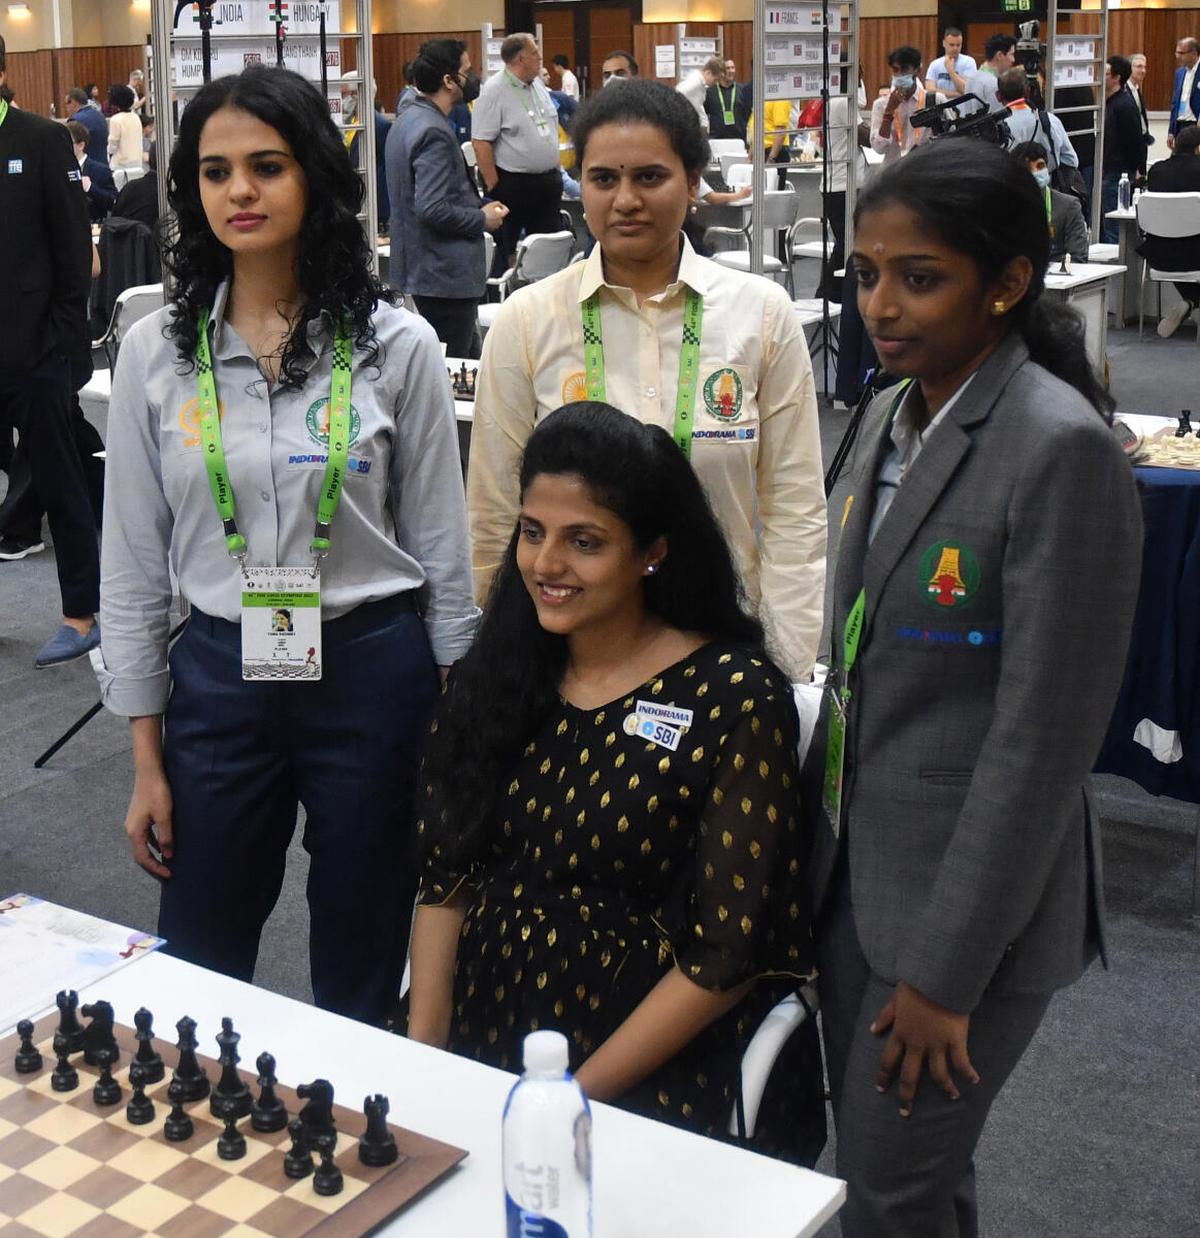 Kamachi TMT Bars - Wishing all the best to team India & all the  participants of the Chennai Chess Olympiad 2022. #chessgame  #chessolympiad2022 #chessington #chessboard #chessmaster #chessmoves  #chesslover #ChessChennai2022 #CHESSCLUB #ChessOlympiad